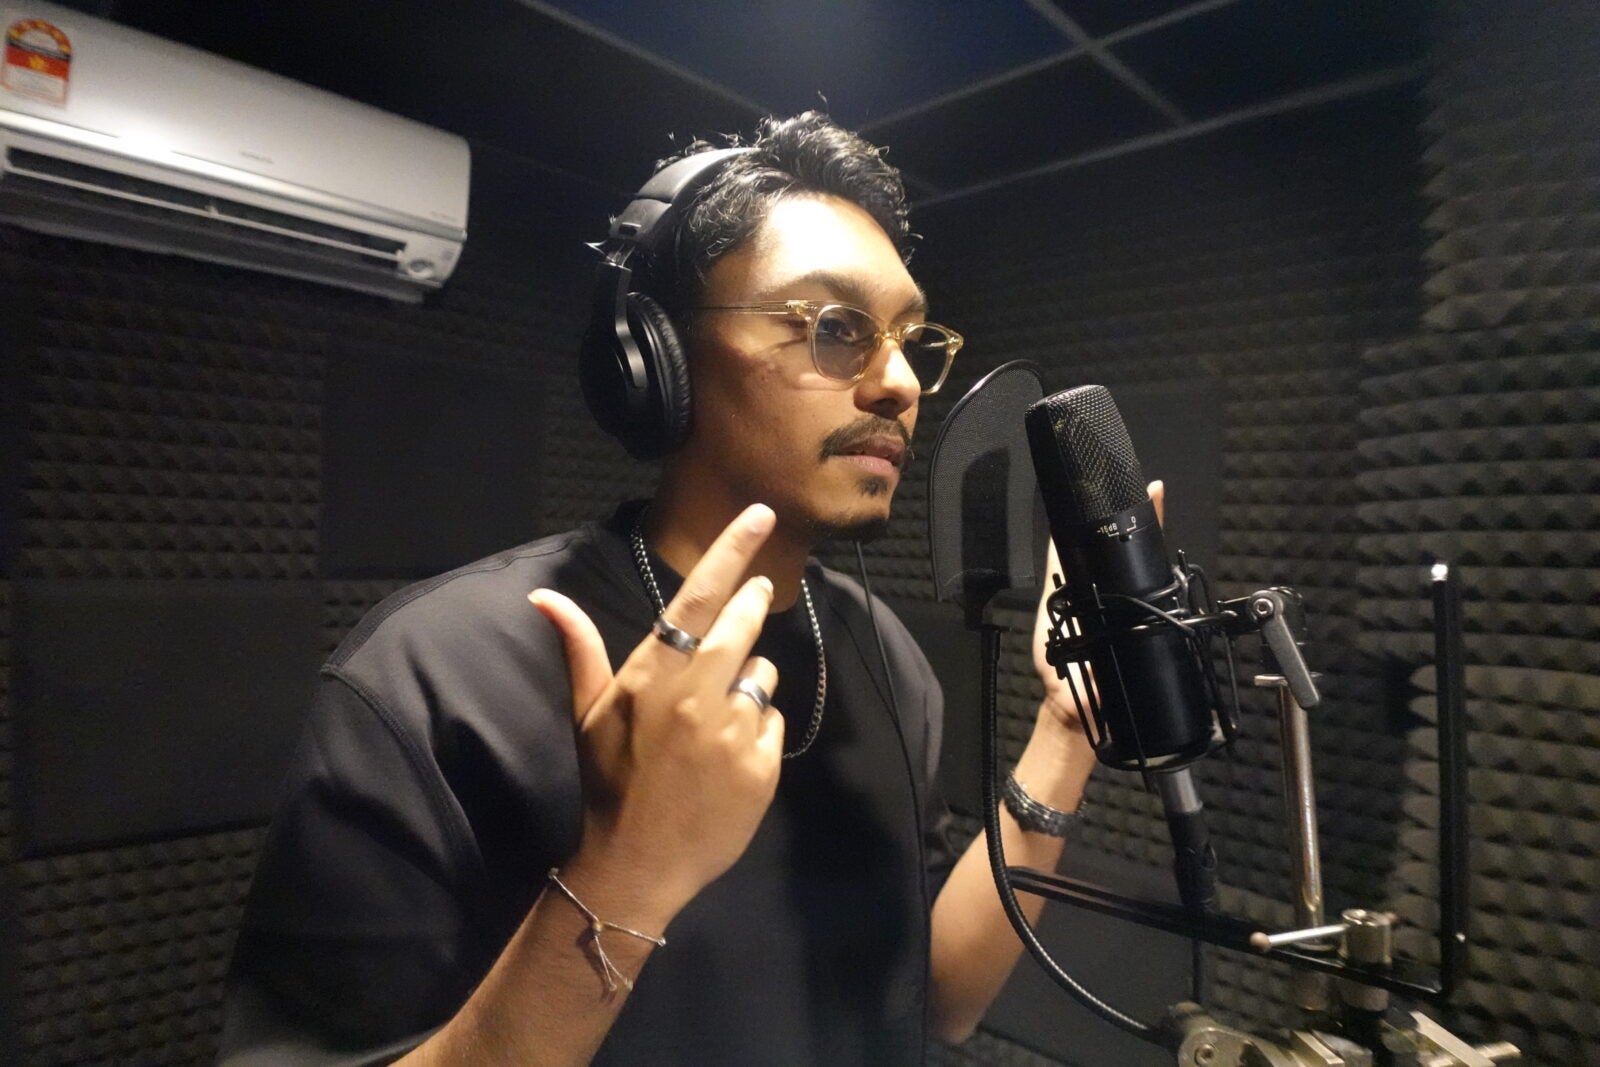 Alan Durairaj, A Malaysian Indian Musician standing infront of a microphone setup in a studio. 